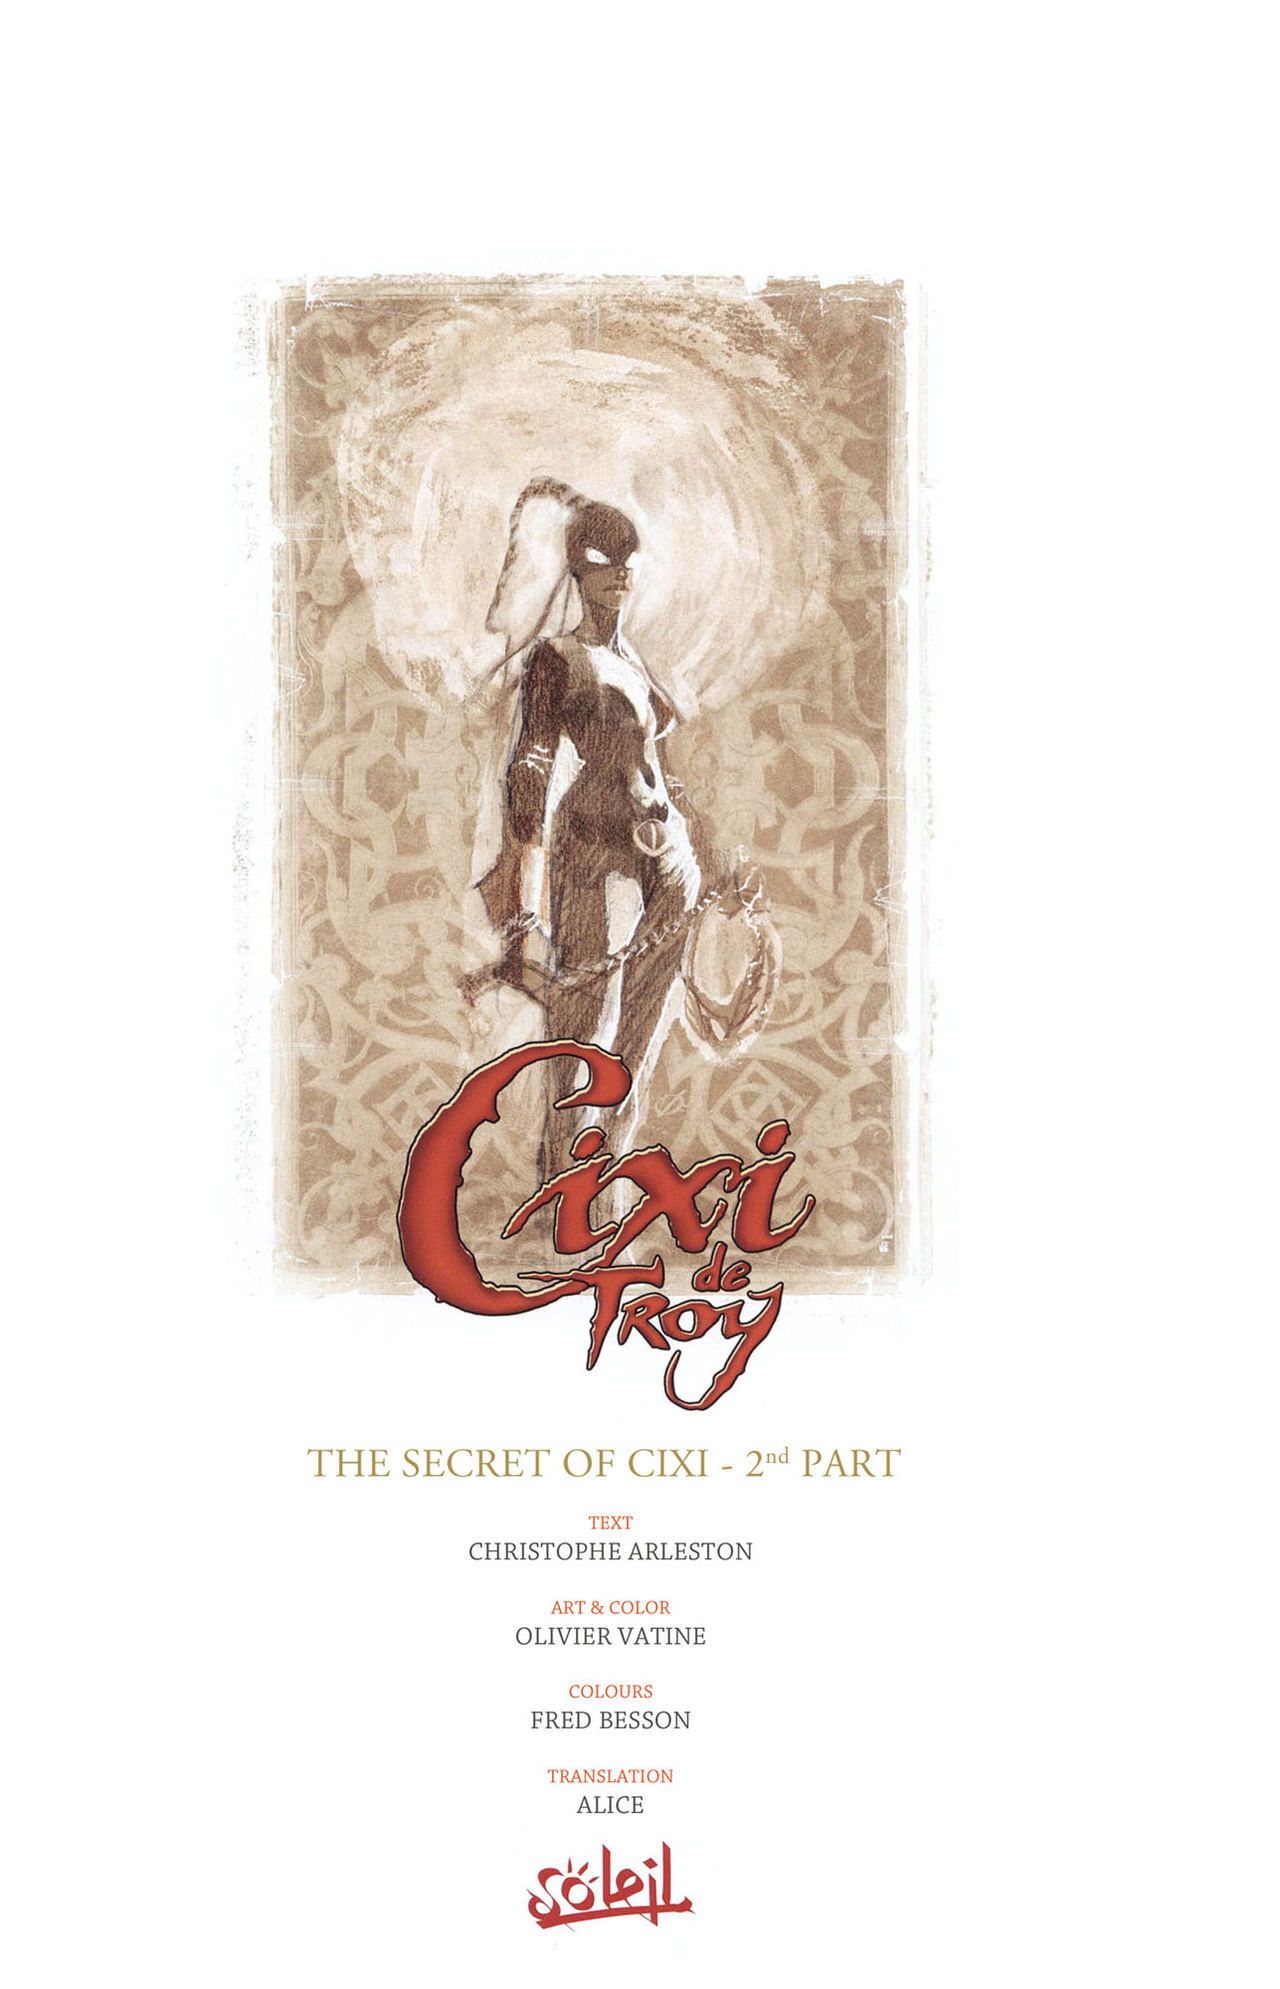 Cixi of Troy - The Secret of Cixi 2nd part